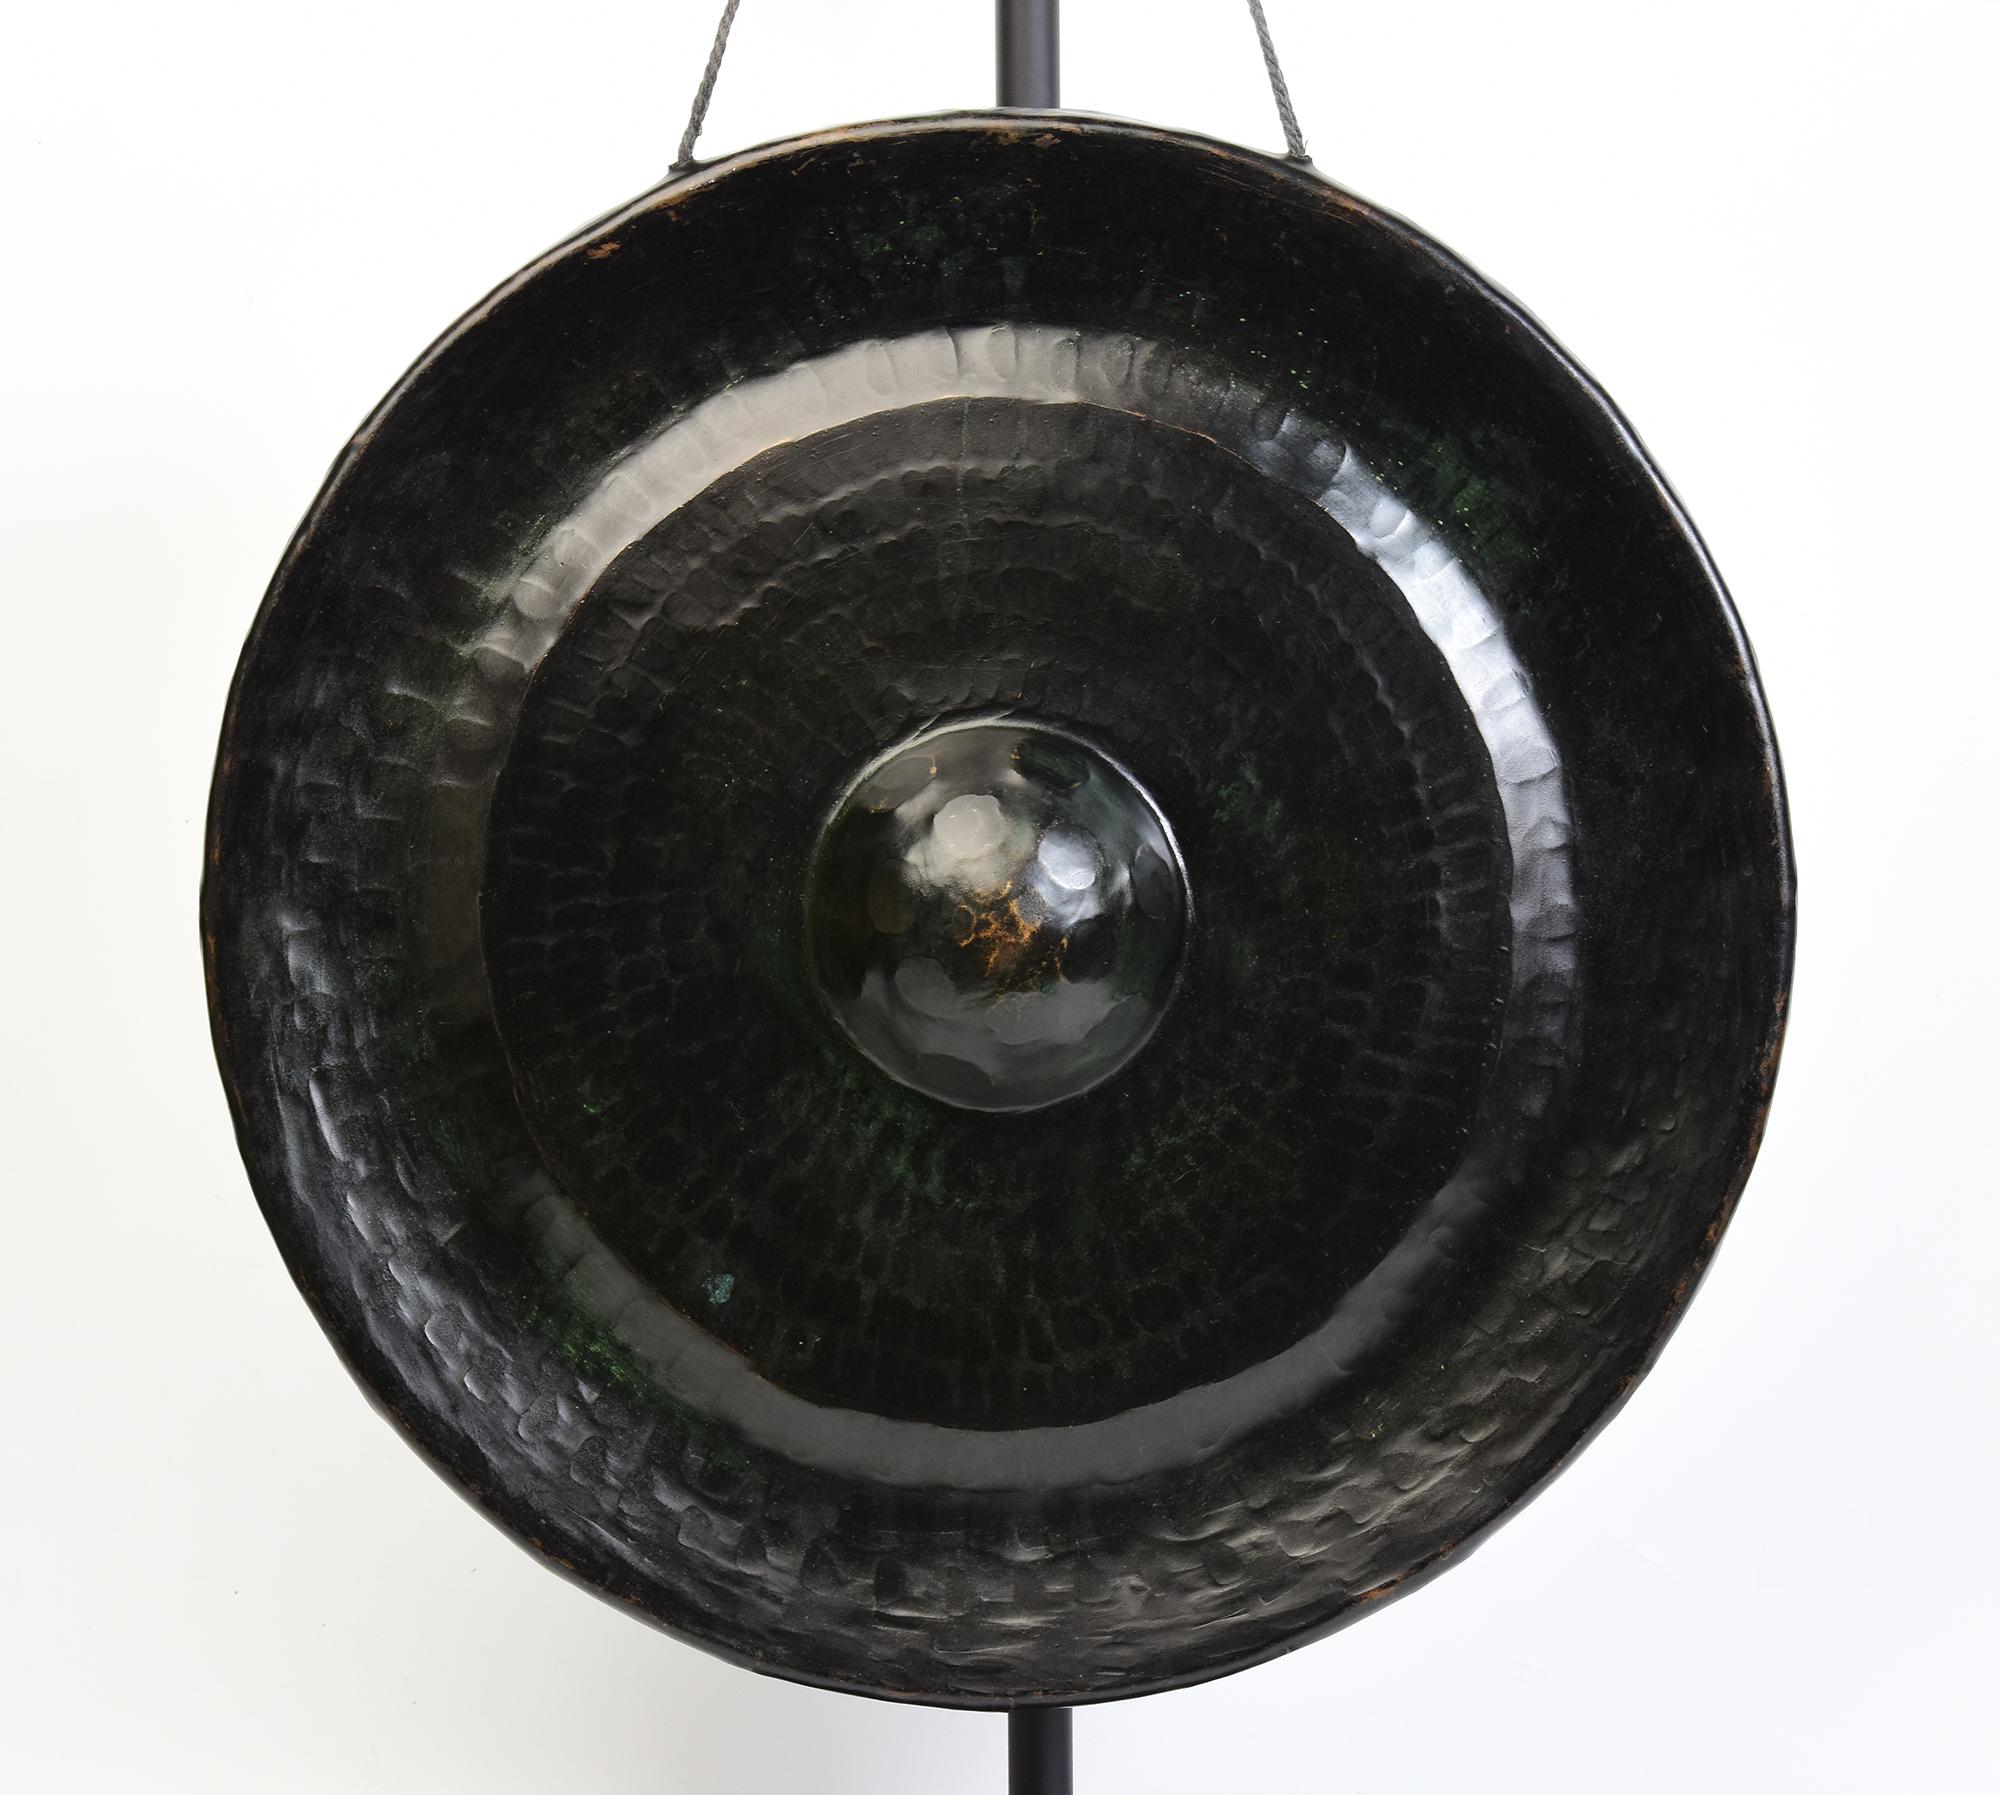 Antique Laos bronze gong, a kind of Laos musical instrument which produces a loud and sonorous sound. Gong stick is included.

Age: Laos, 19th Century
Size of gong only: Diameter 44.5 C.M. / Thickness 10 C.M.
Height including stand: 66.2